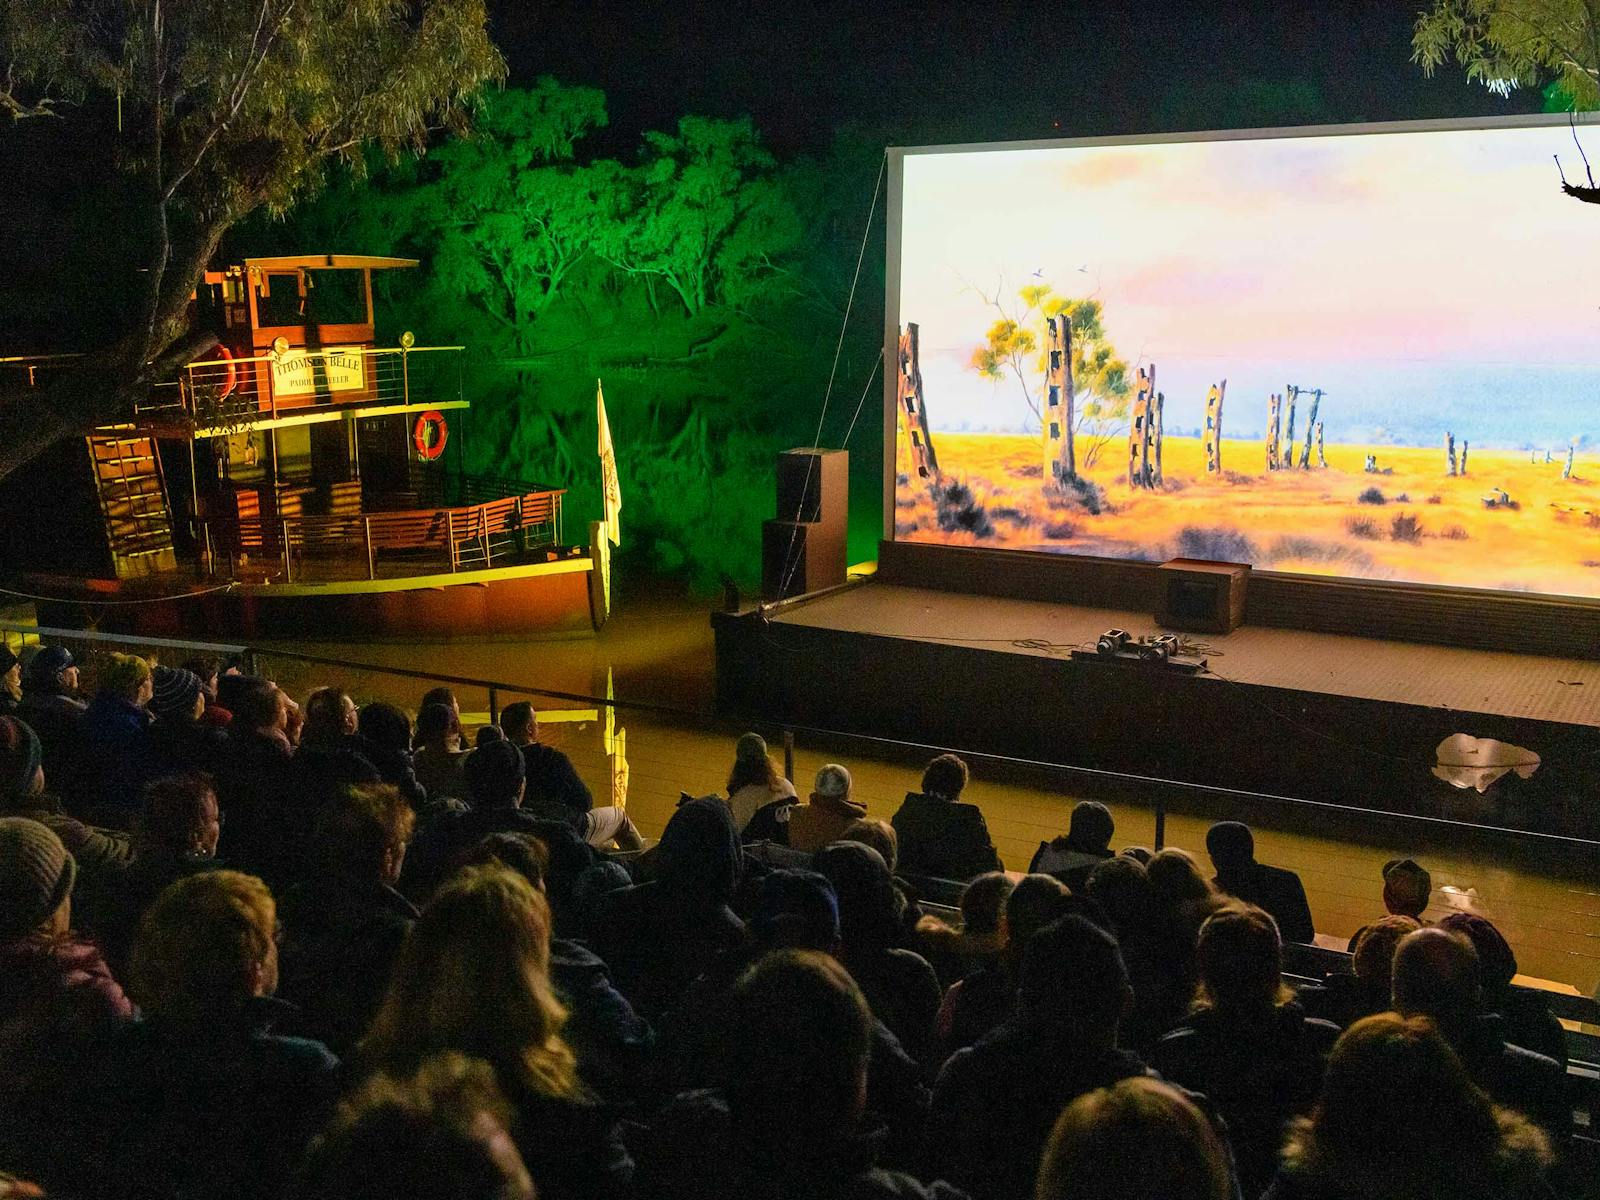 Illuminated river bank movie screen with guests watching at night